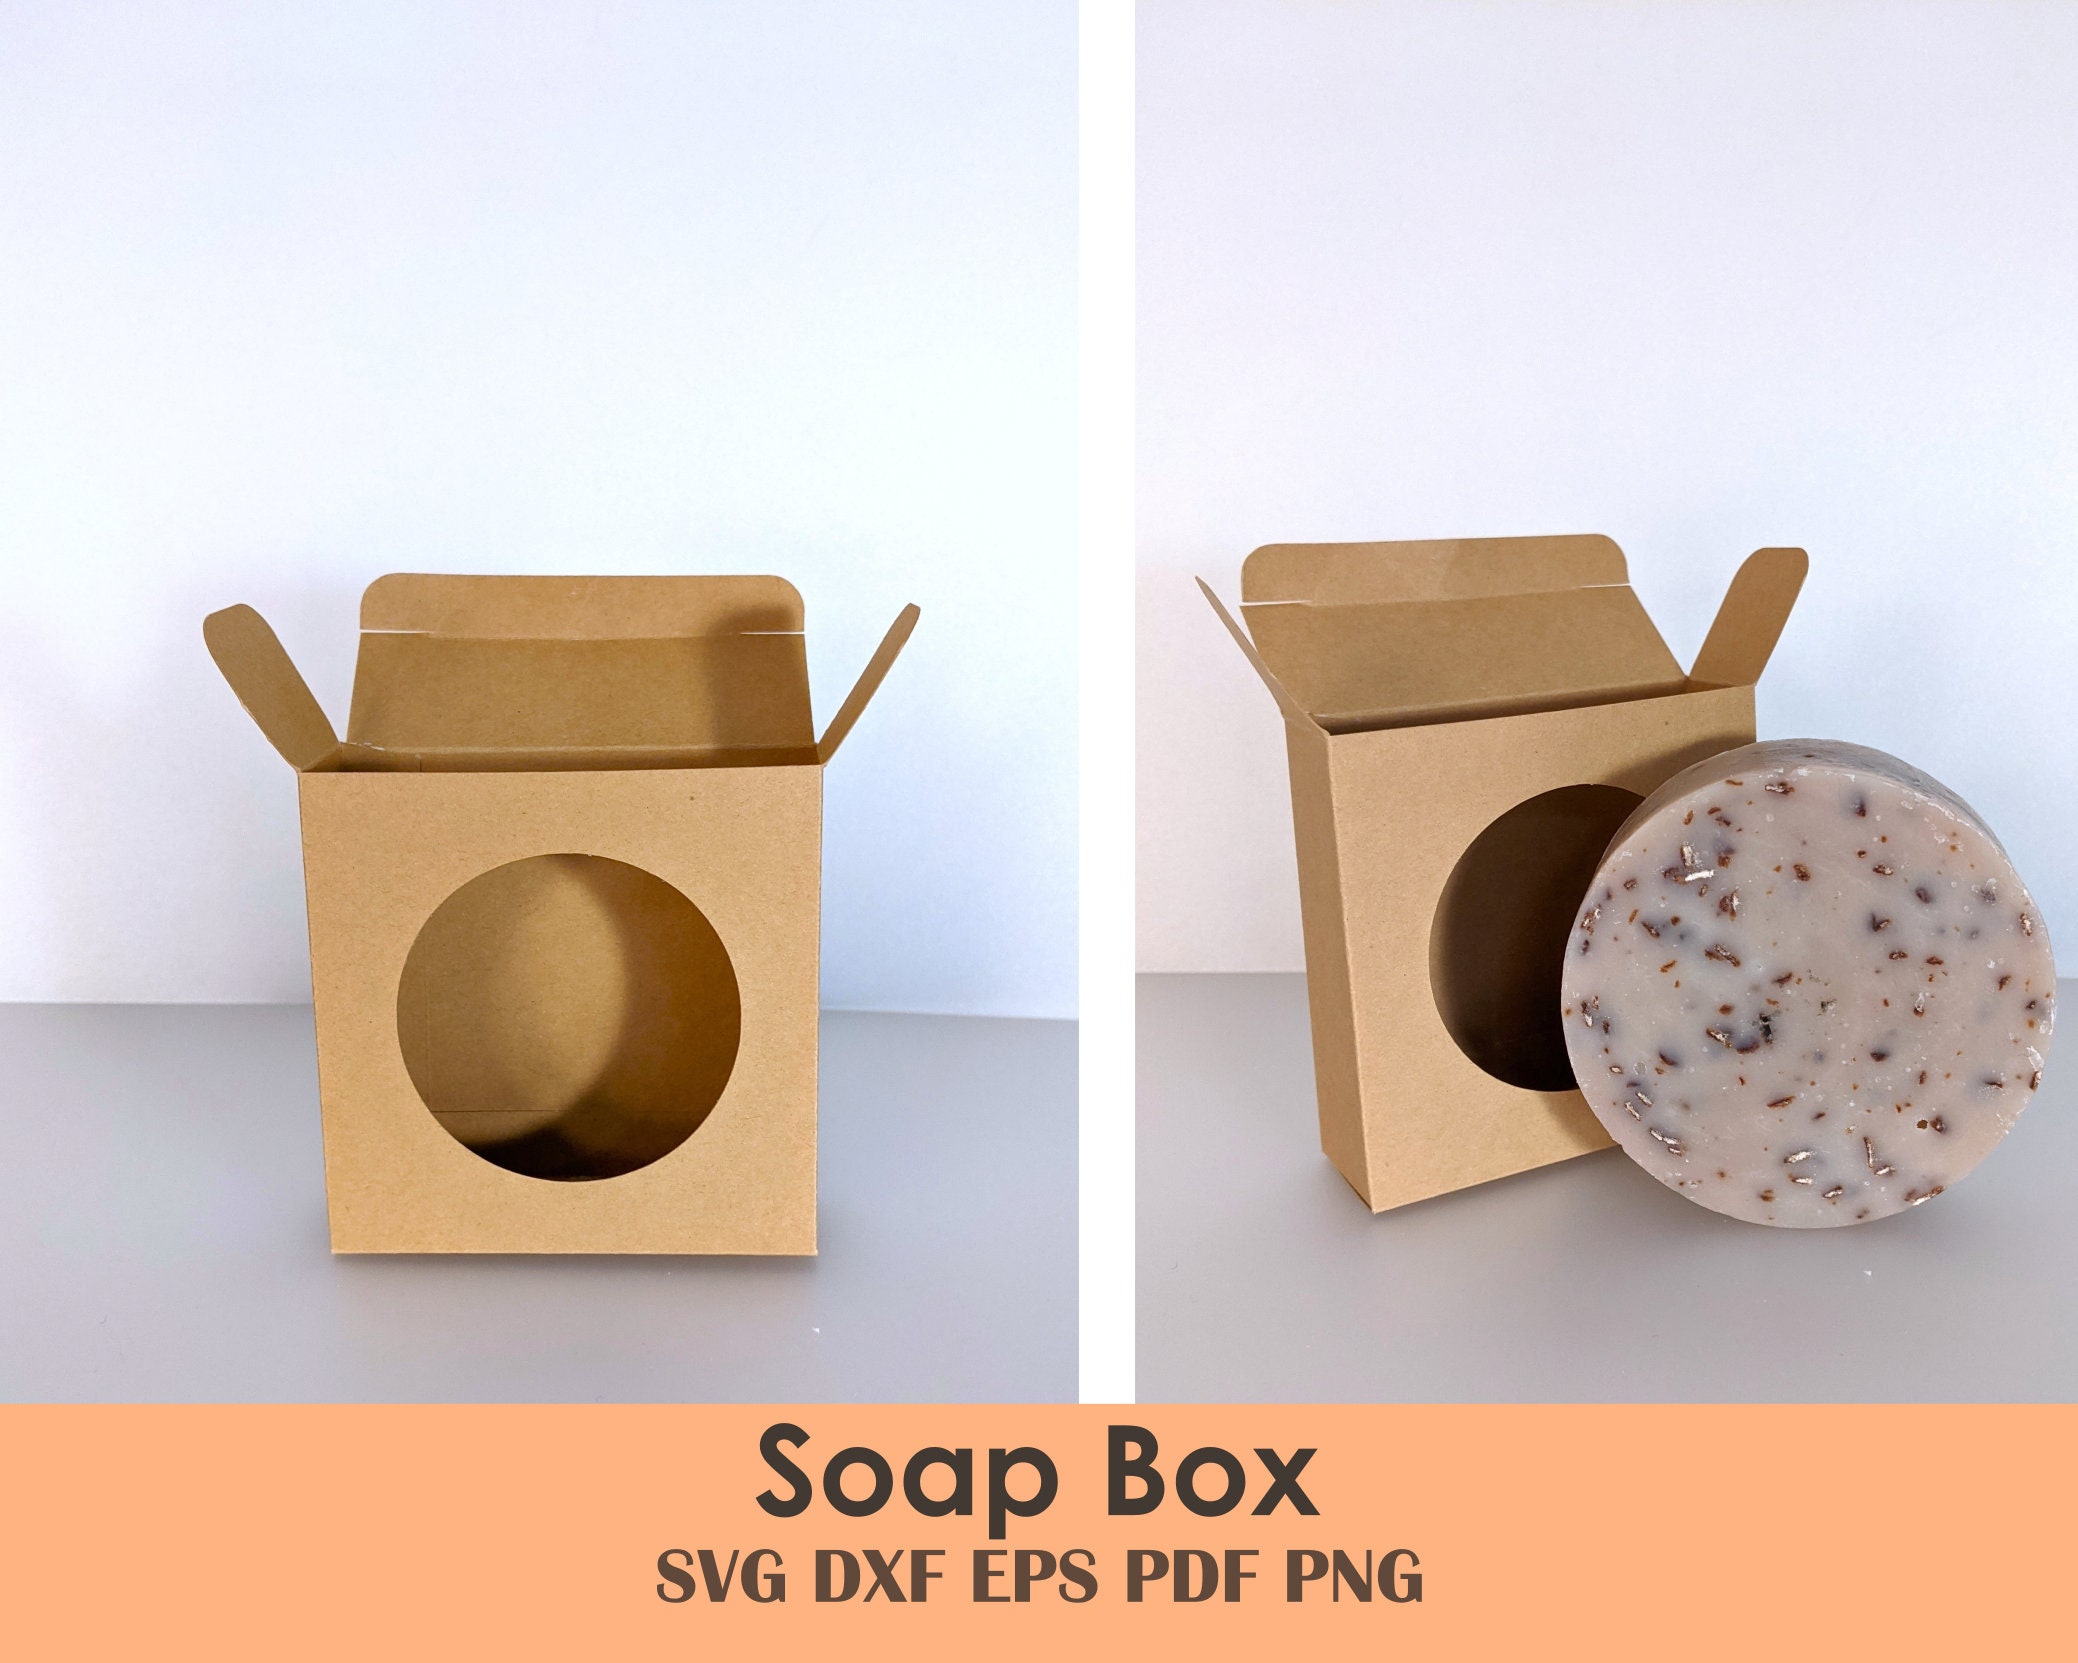 16 Pcs Soap Boxes For Homemade Soap,3.54 X 2.36 X 1.18 Inch Soap Boxes With  Window,Kraft Soap Packaging Boxes Supplies Soap Box, Mini Kraft Boxes With  Window Soap Boxes For Homemade Soap